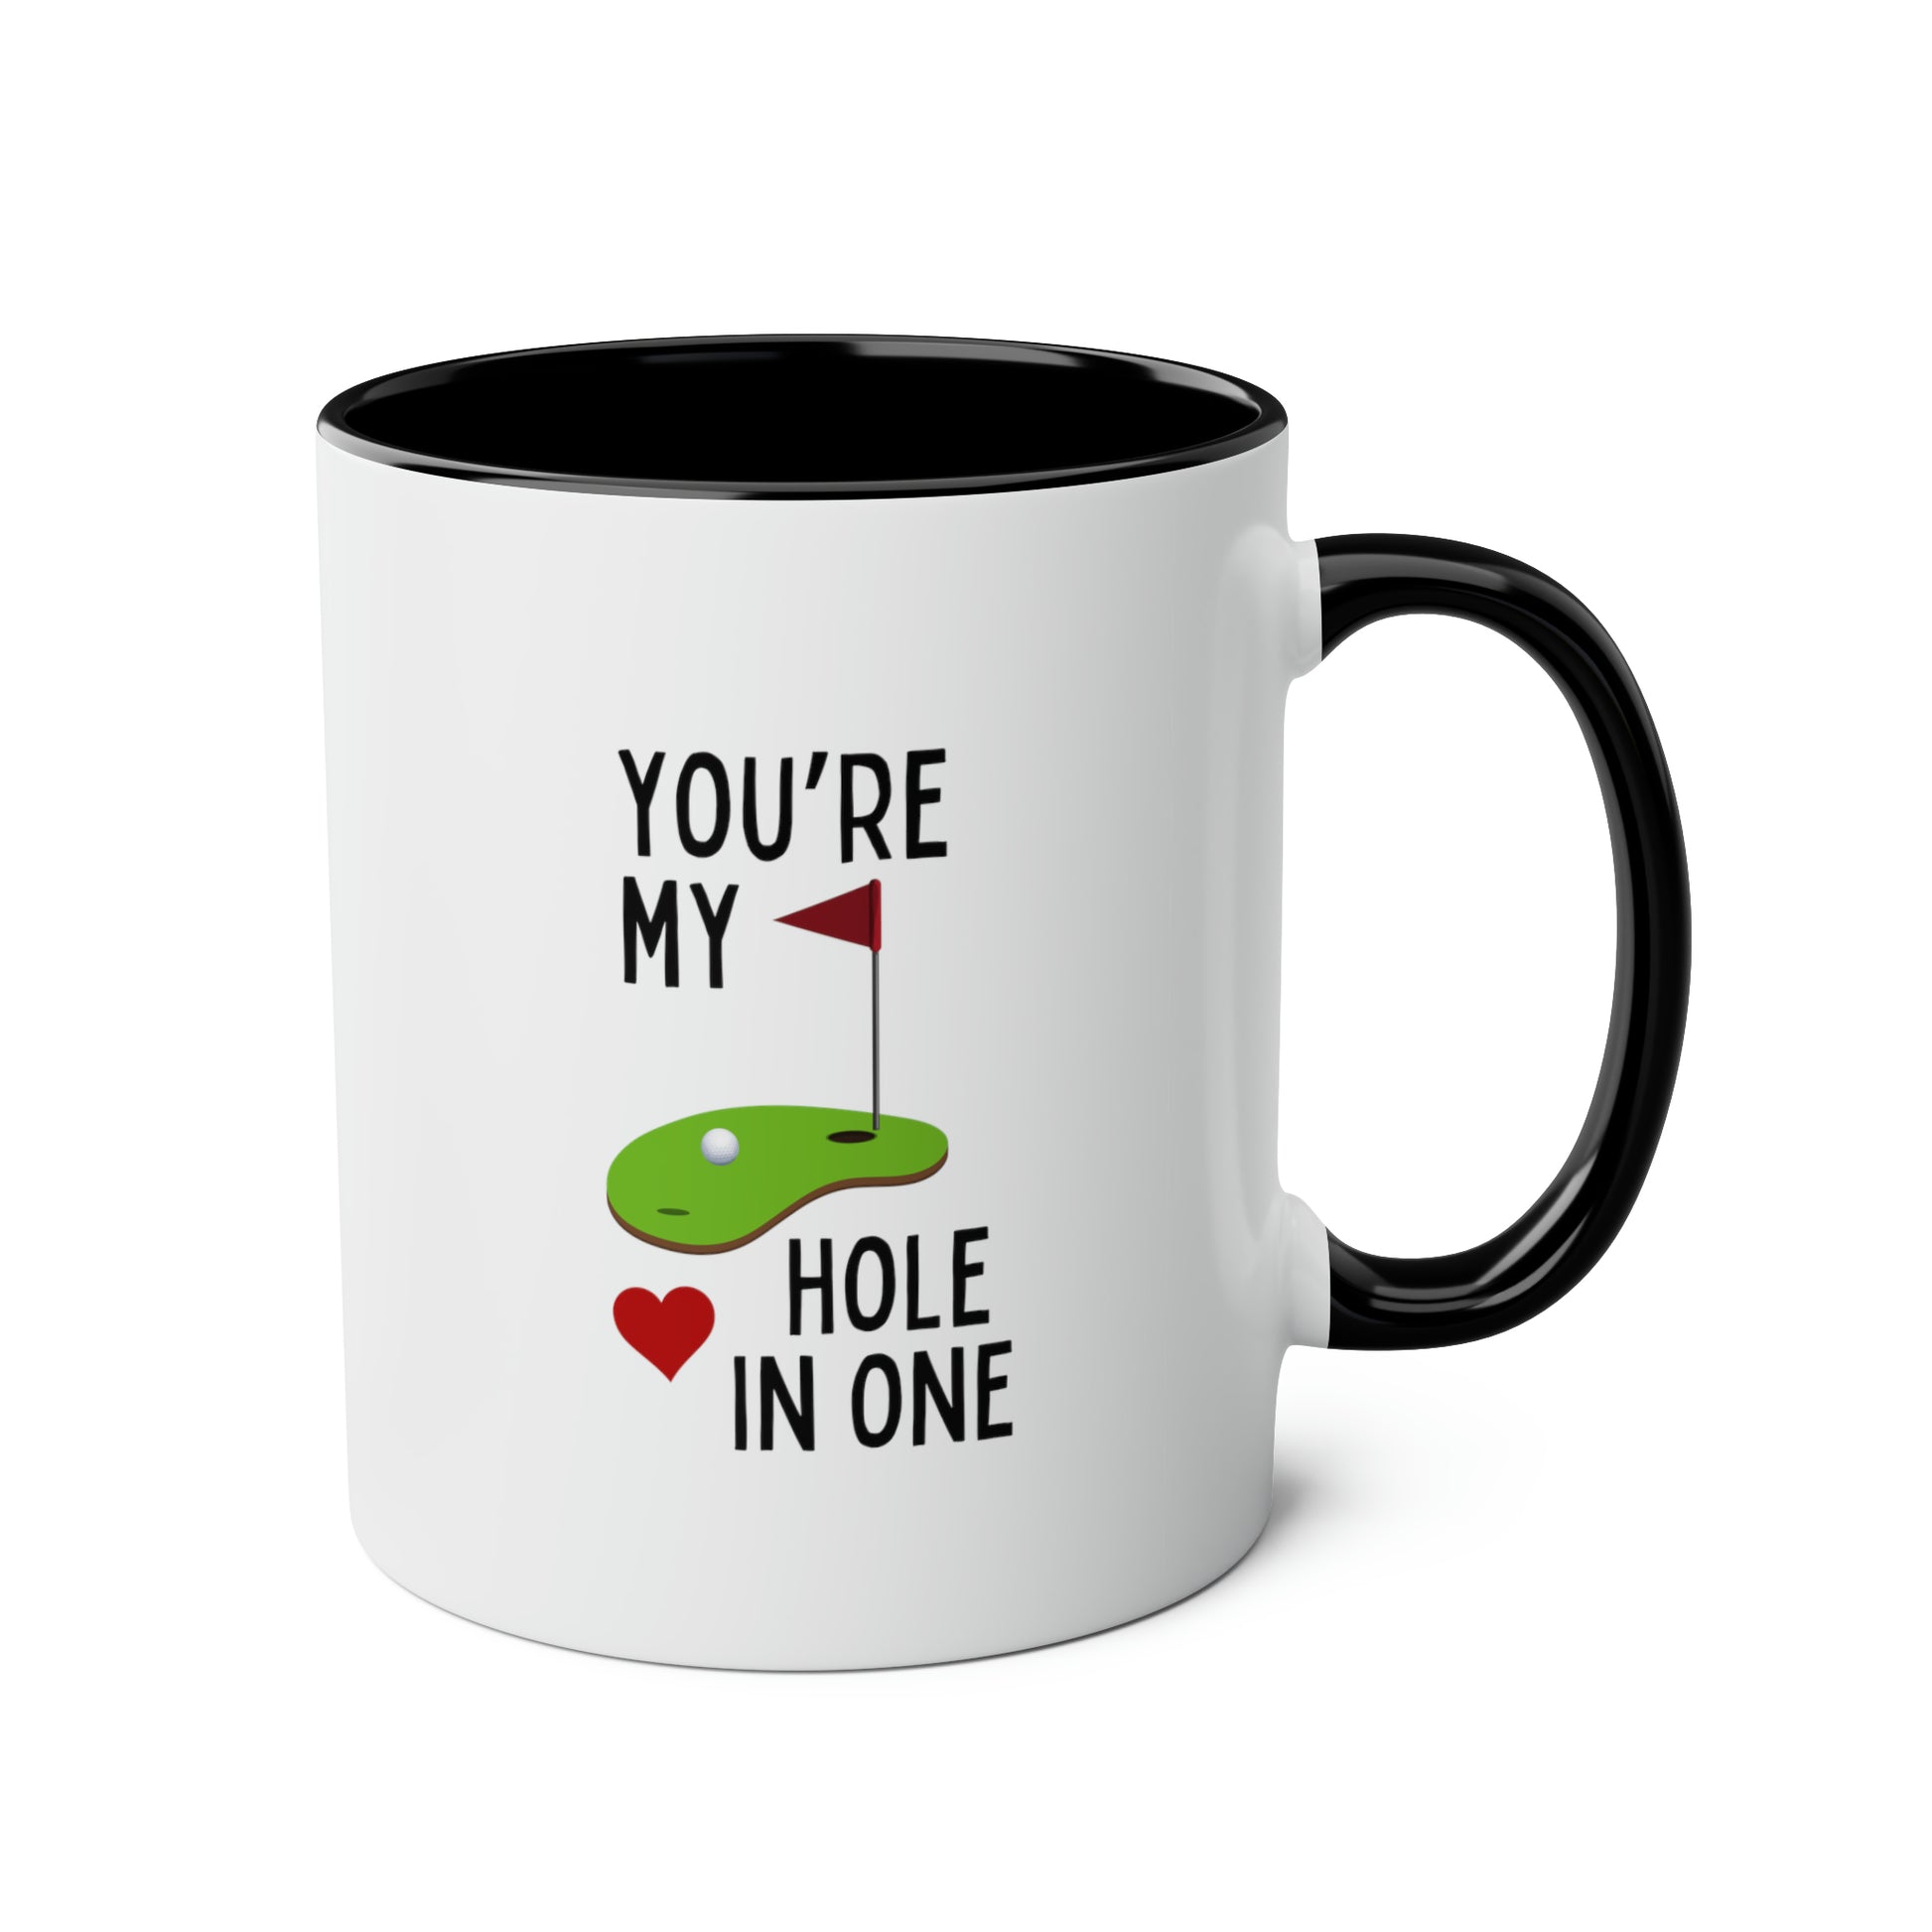 You're My Hole In One 11oz white with black accent funny large coffee mug gift for golf player lover husband boyfriend golfer  waveywares wavey wares wavywares wavy wares